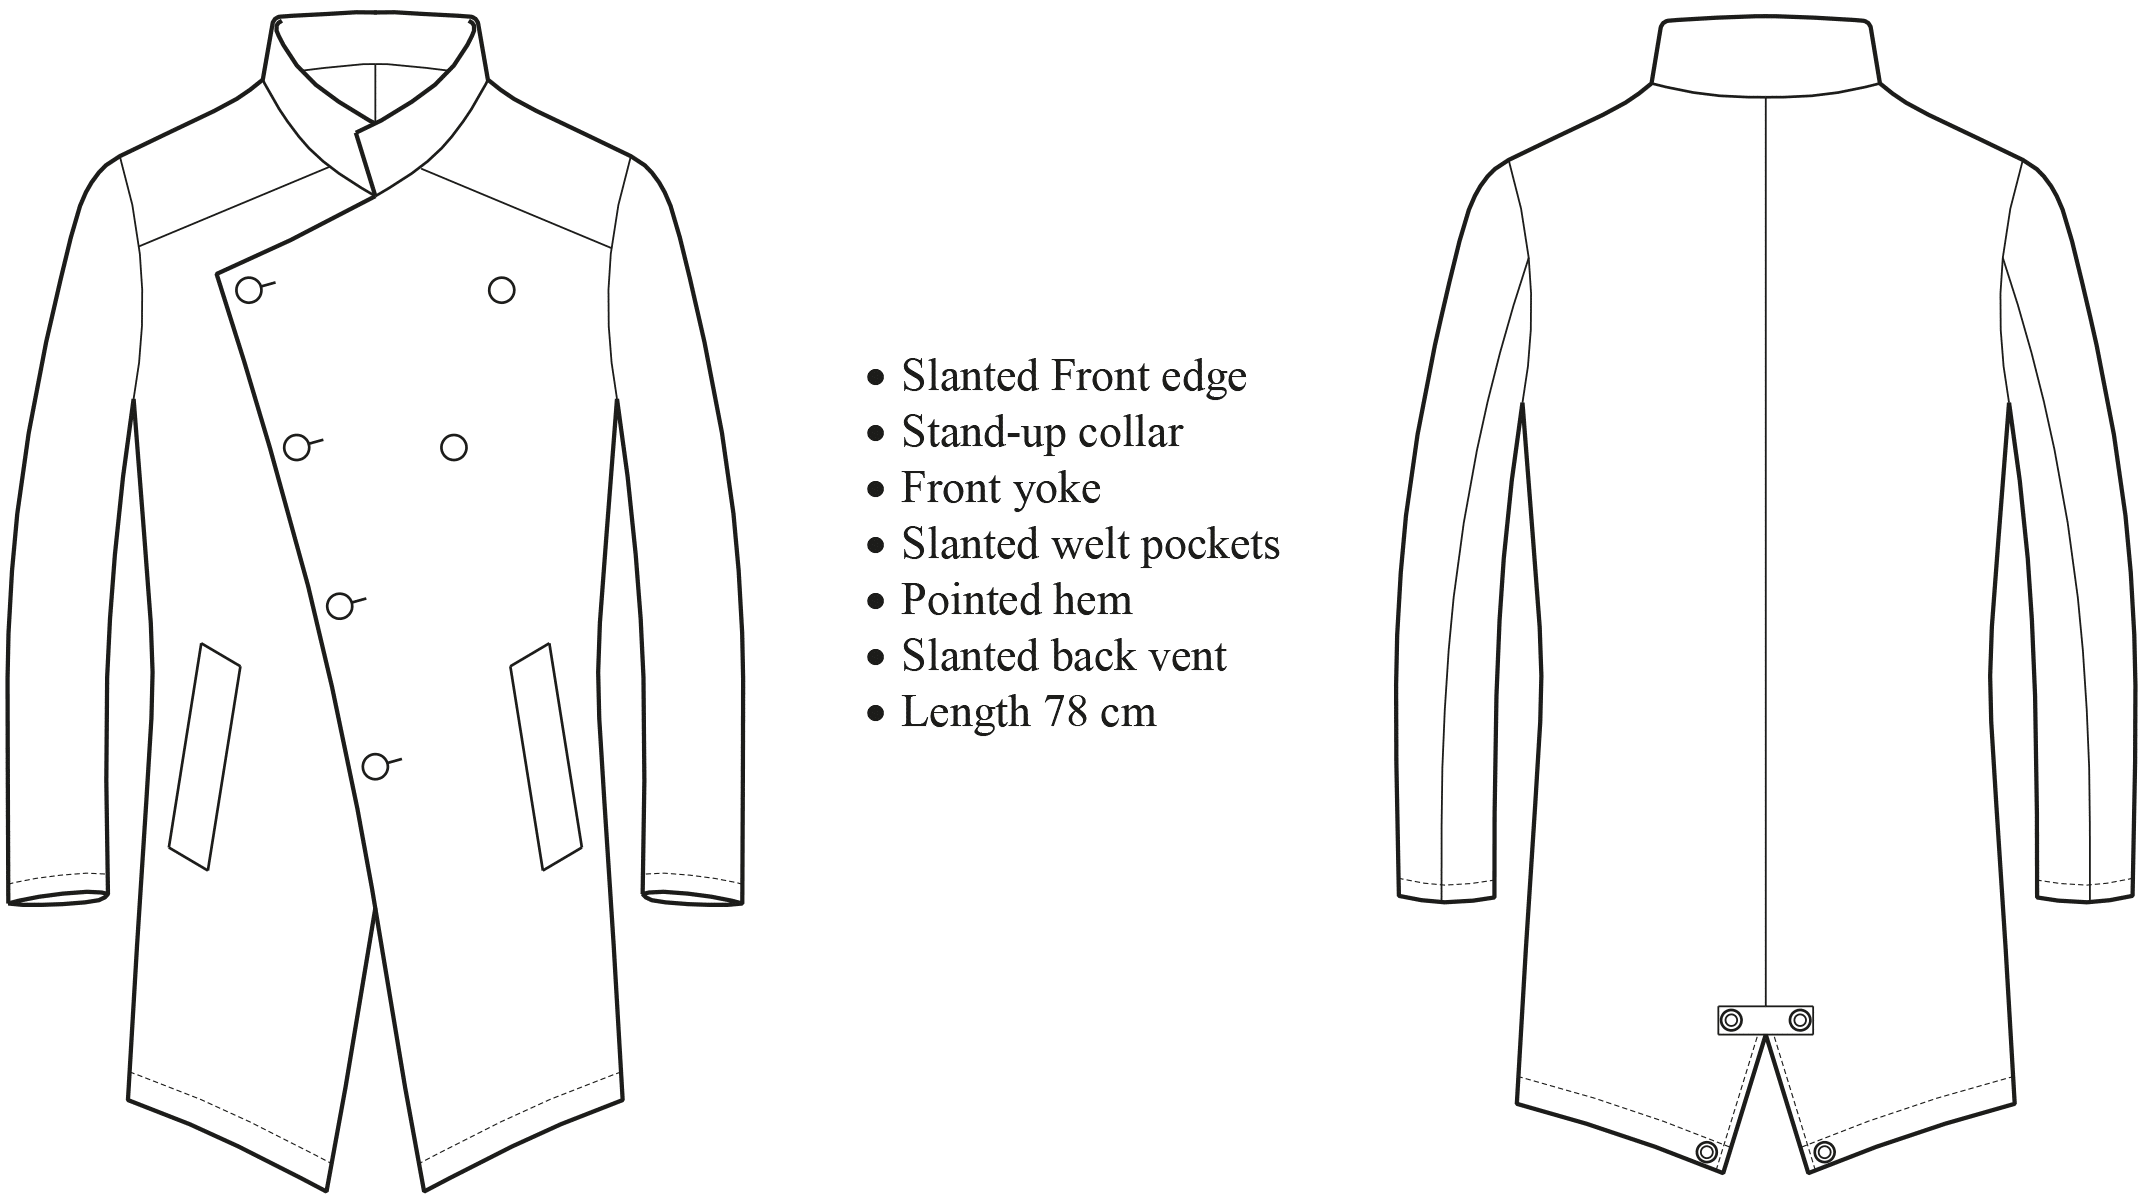 You see the technical drawing of an aysmmetric coat for the pattern construction.